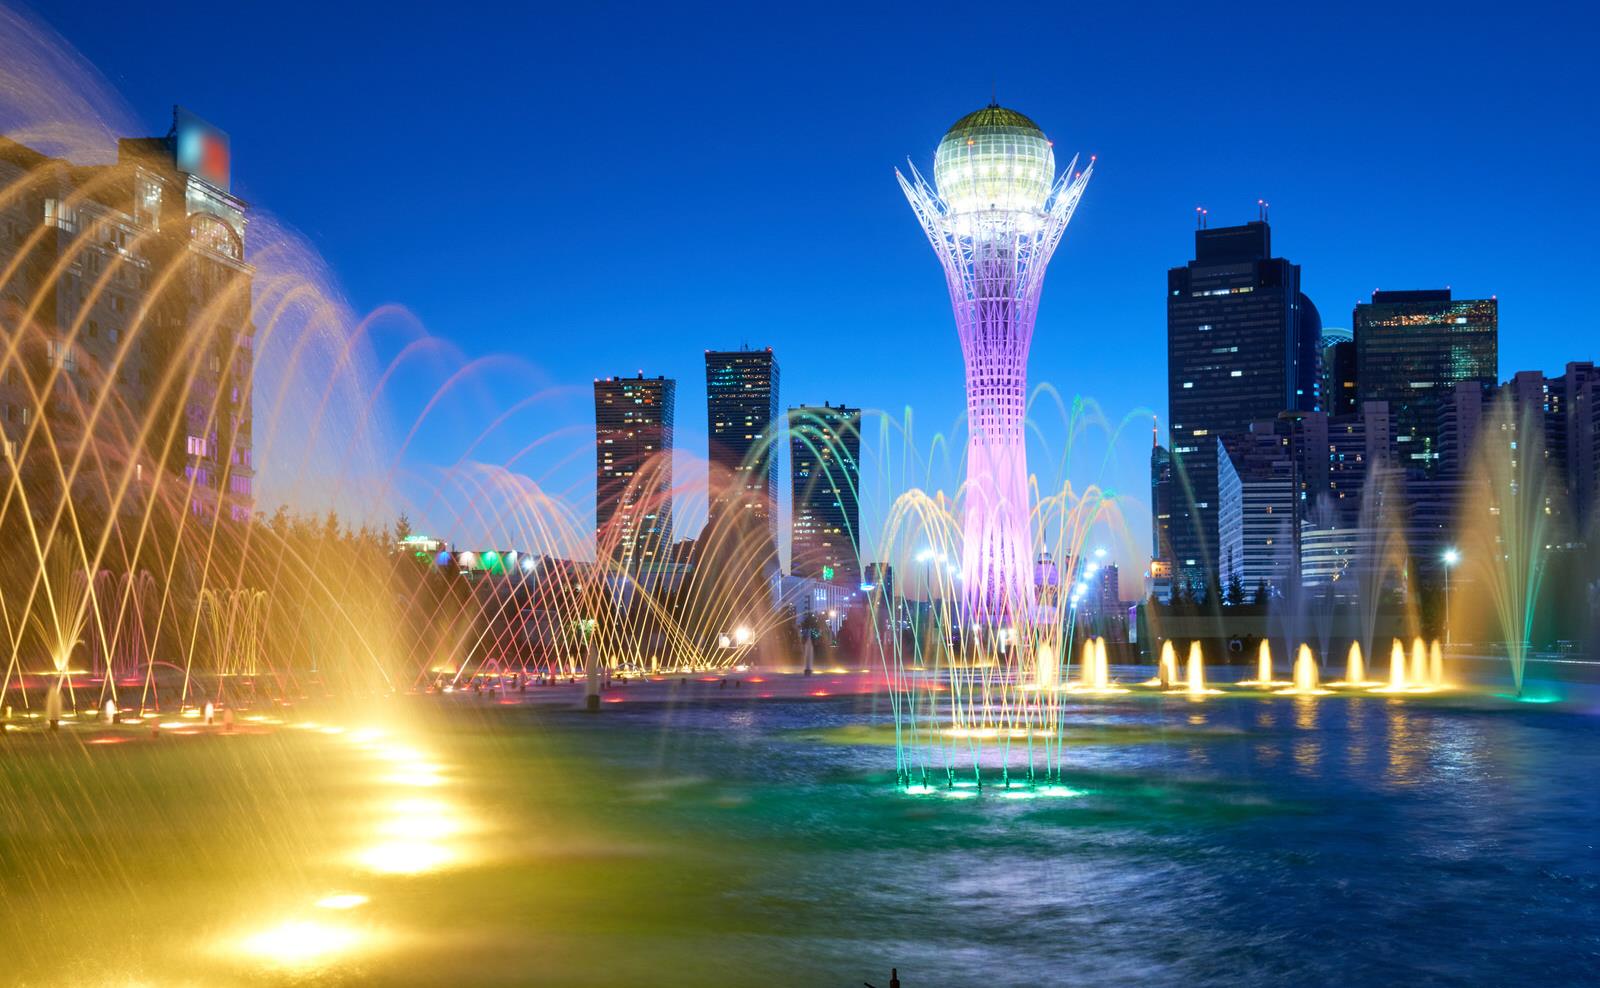 astana-architecture-GettyImages-674452780-1-129b262b0904.jpg